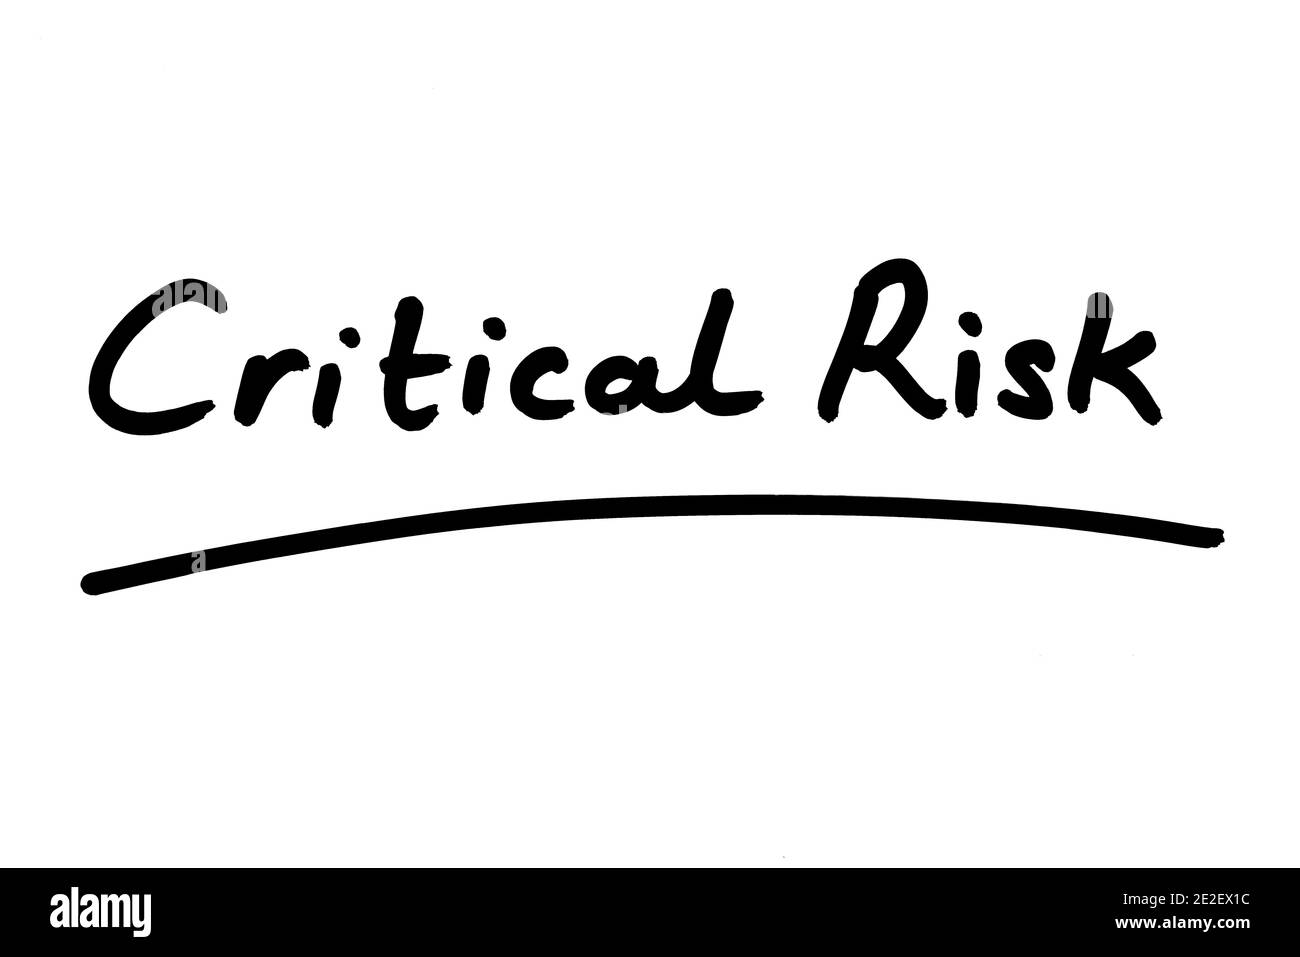 Critical Risk handwritten on a white background. Stock Photo